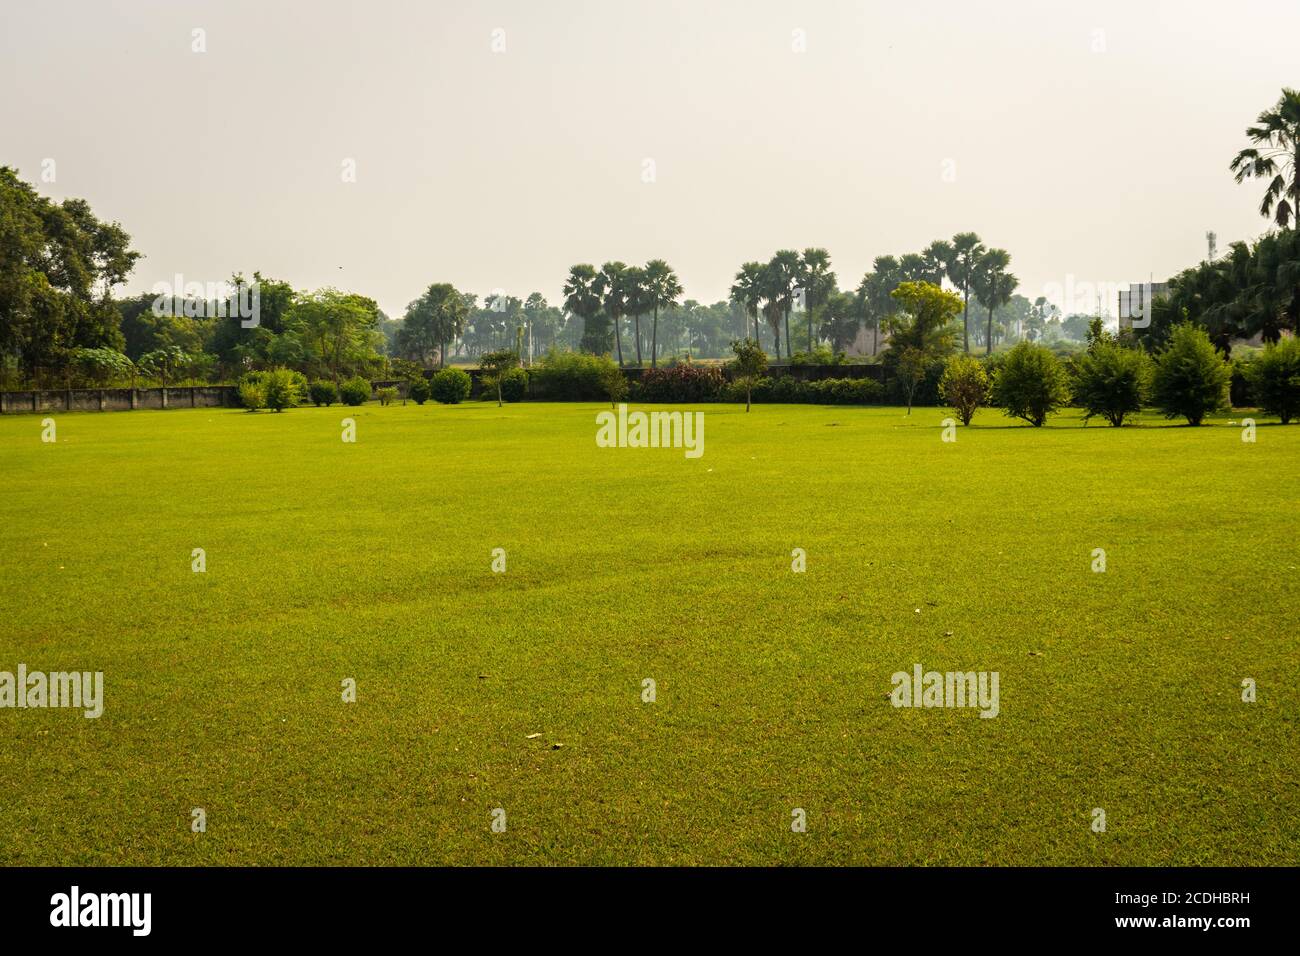 green grass ground with flat sky image is showing the place from game in urban city. Stock Photo